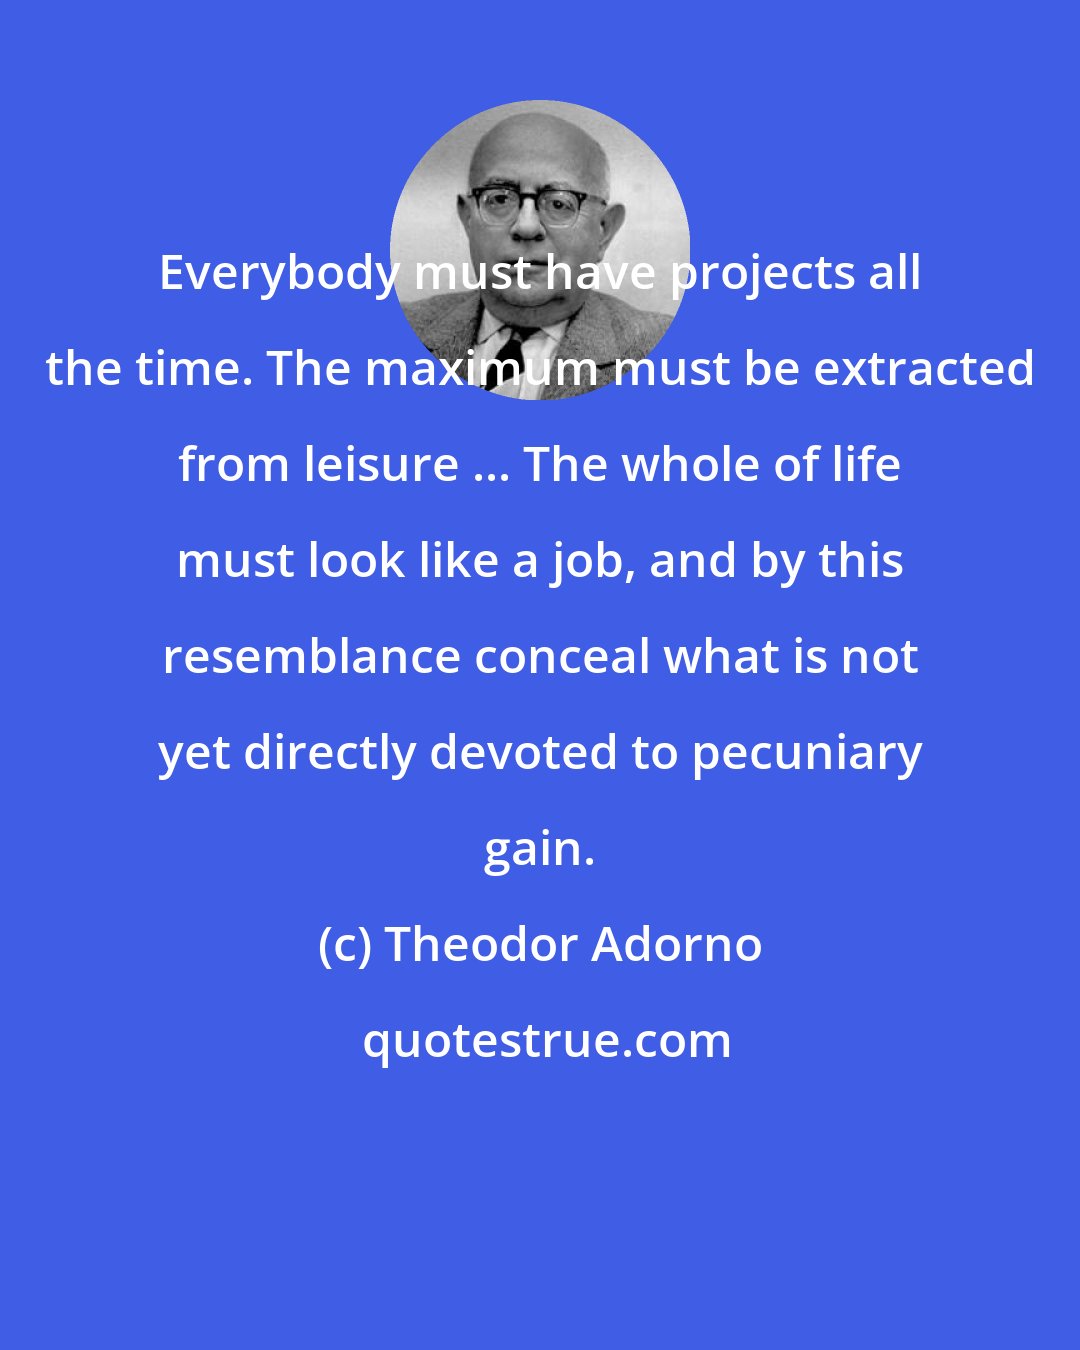 Theodor Adorno: Everybody must have projects all the time. The maximum must be extracted from leisure ... The whole of life must look like a job, and by this resemblance conceal what is not yet directly devoted to pecuniary gain.